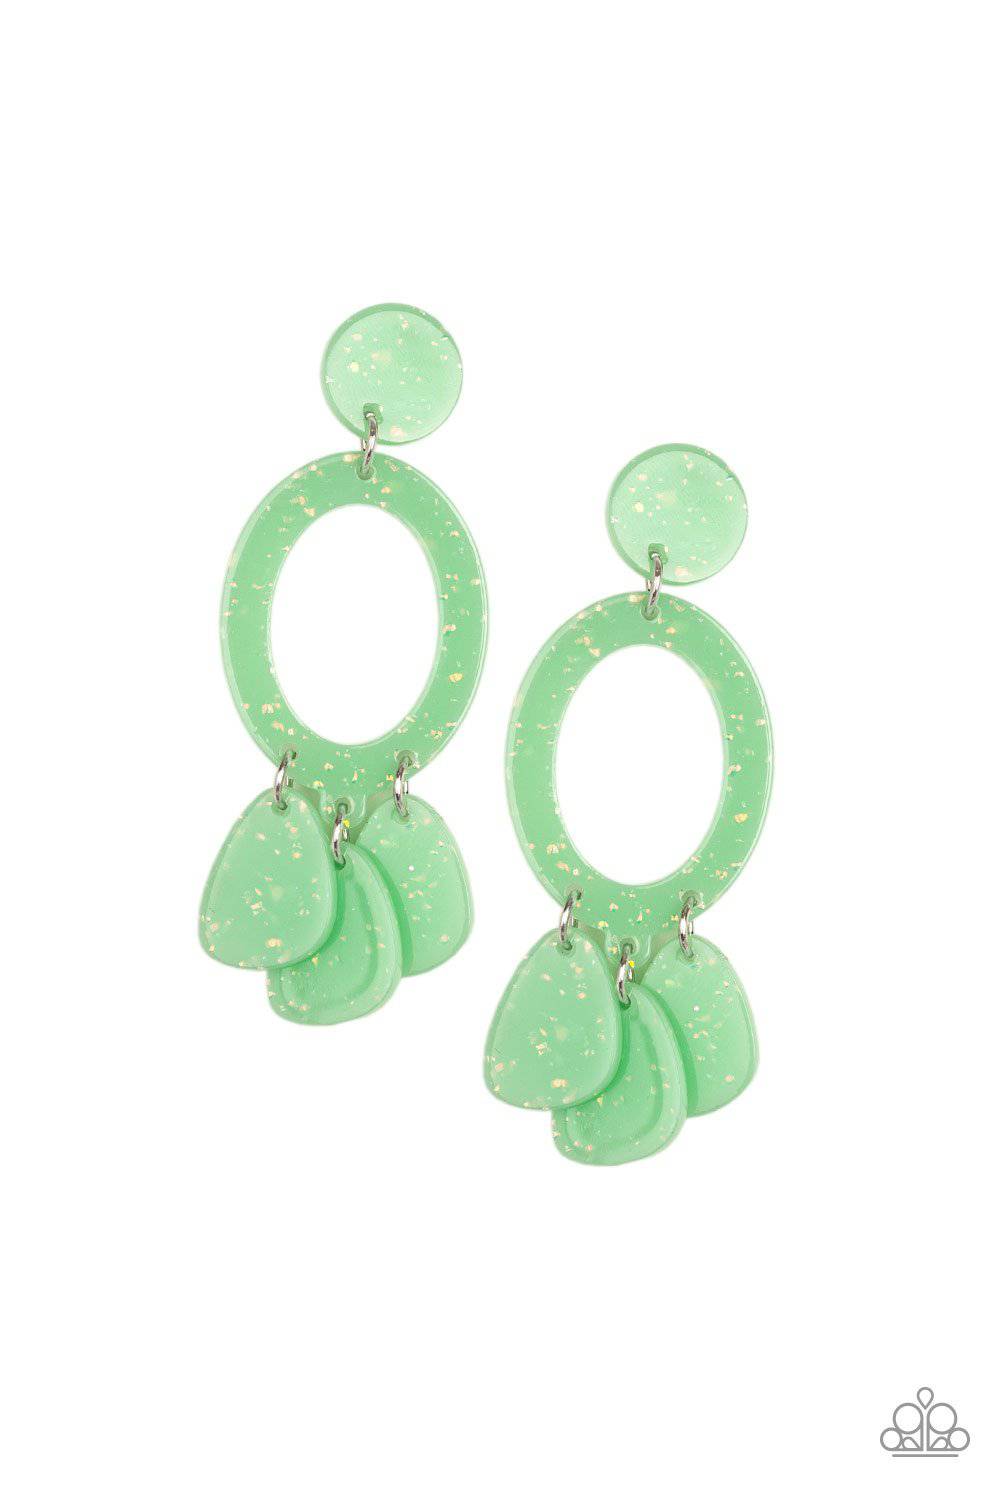 Sparkling Shores - Green Acrylic Earrings - Paparazzi Accessories - GlaMarous Titi Jewels